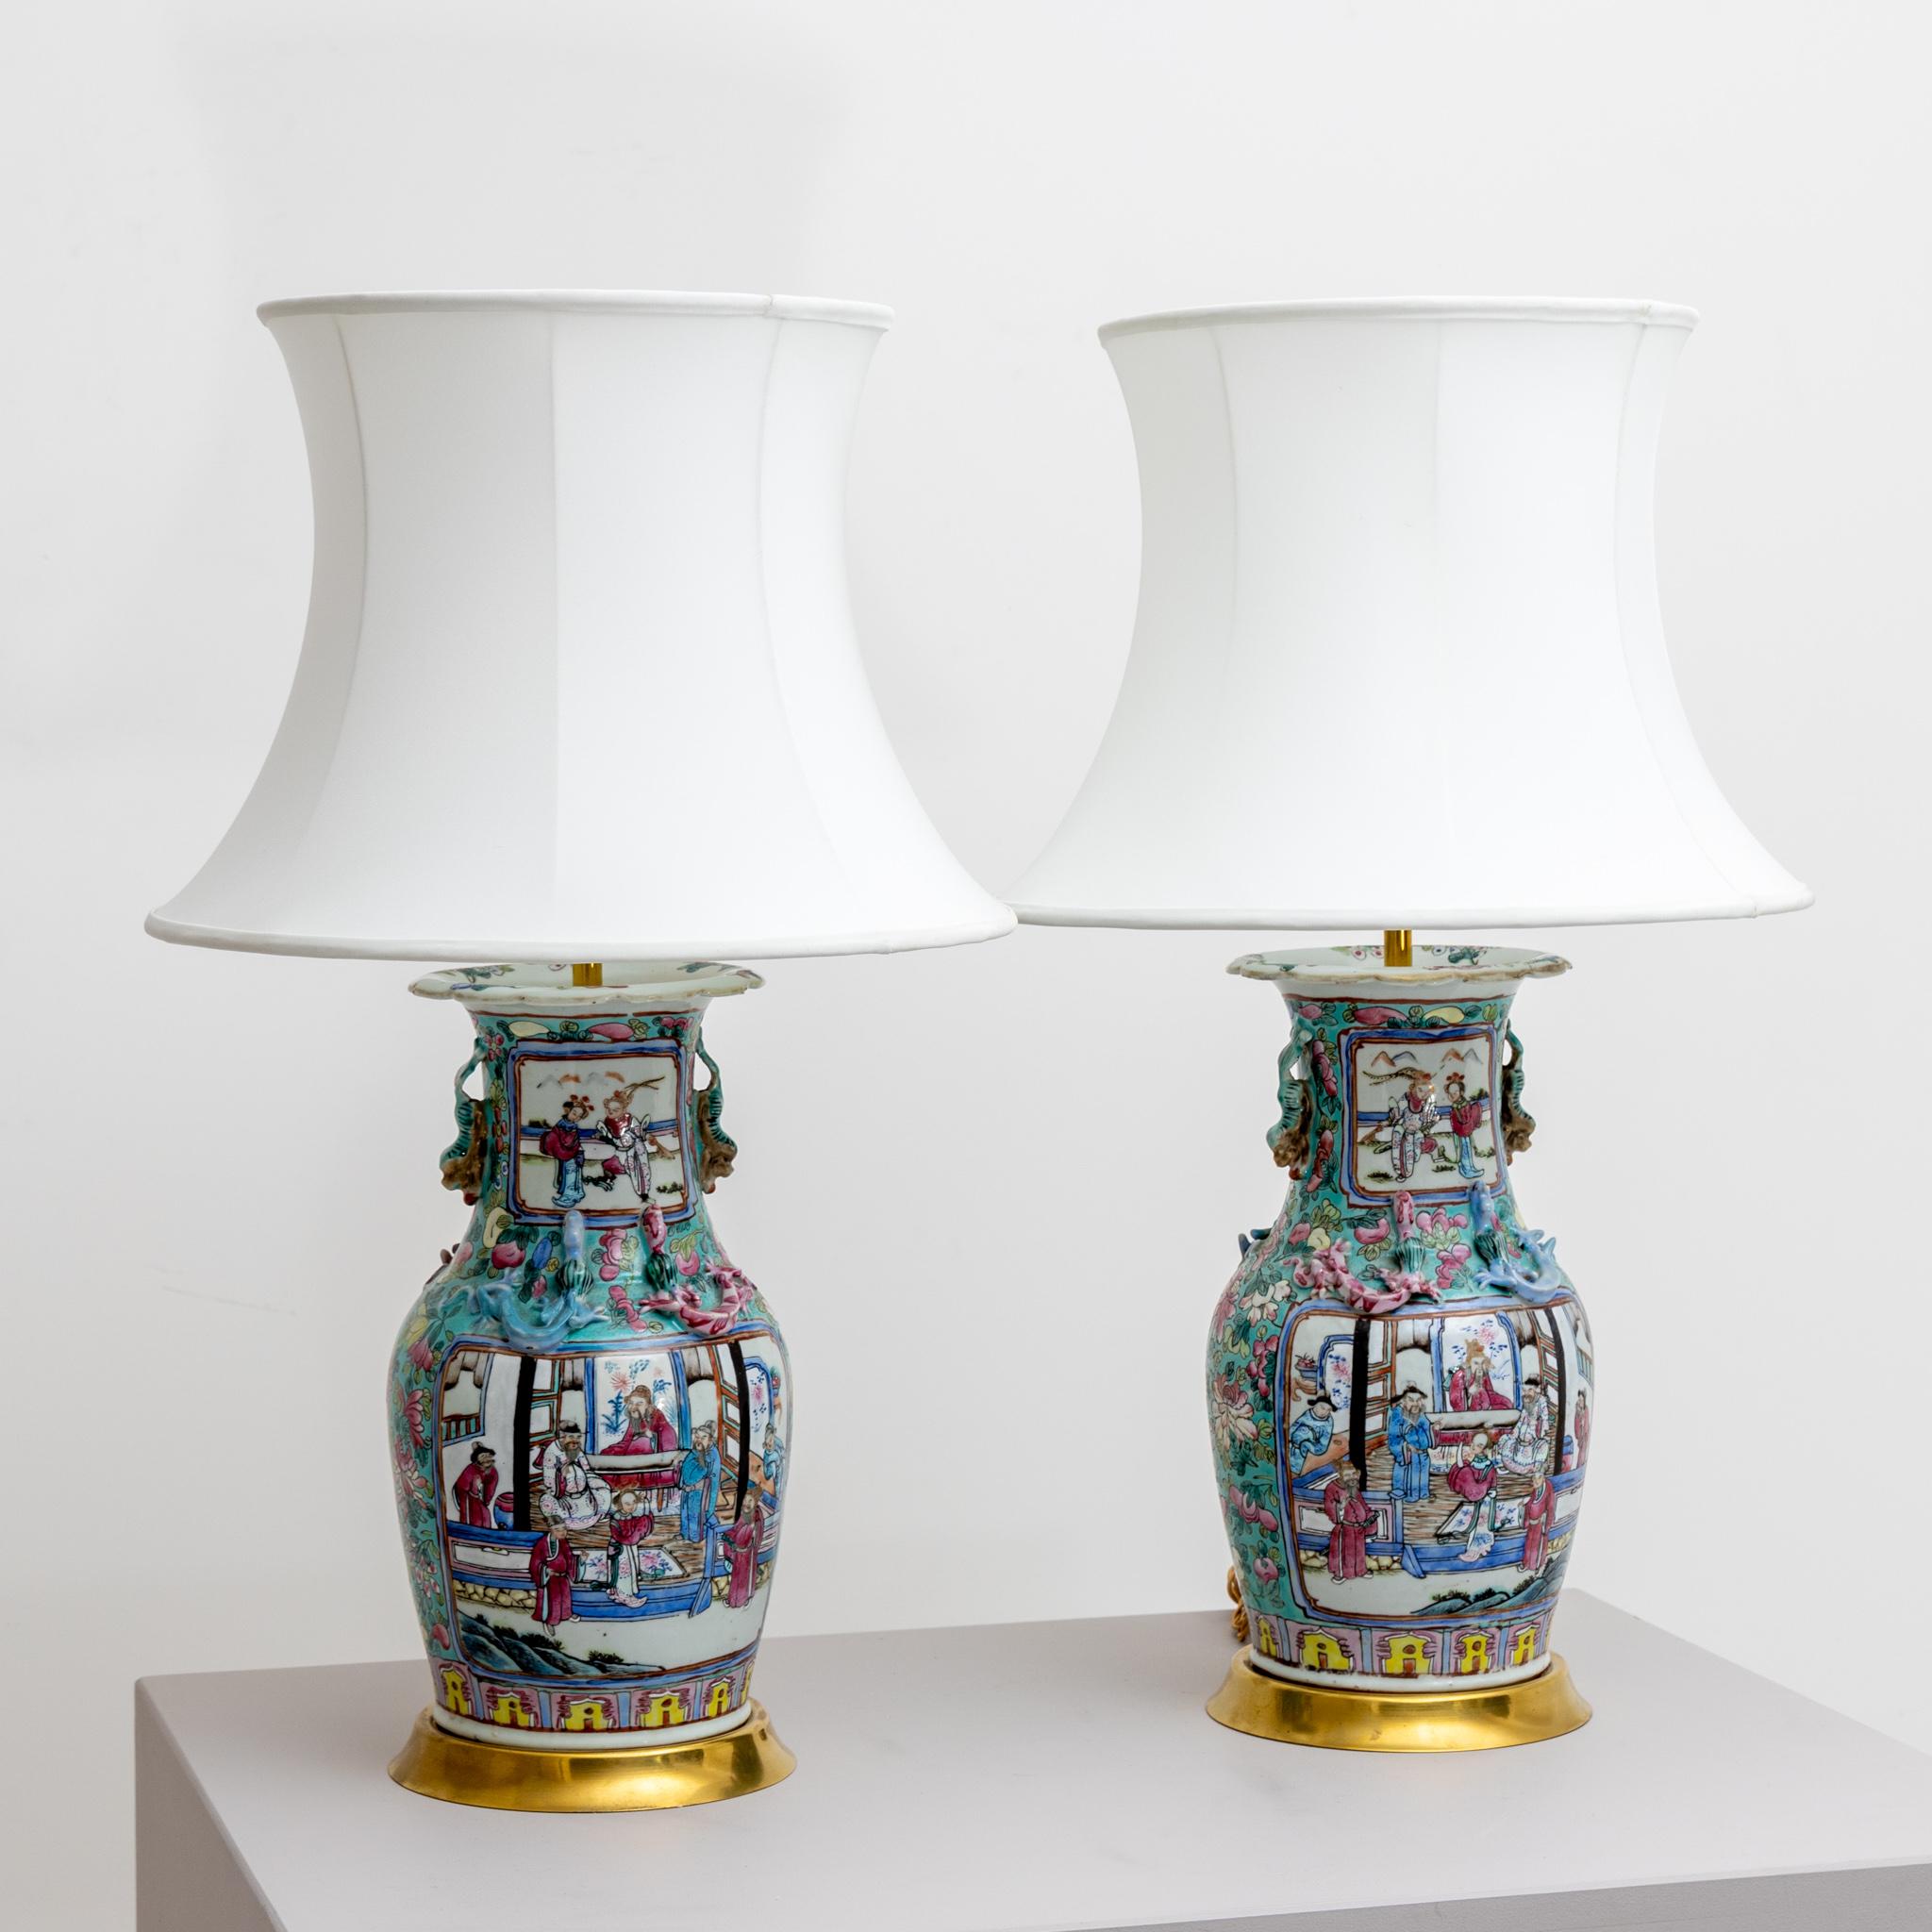 Pair of table lamps with polychrome painted porcelain vases as lamp bases and white fabric shades. One Lamp with old repairs.